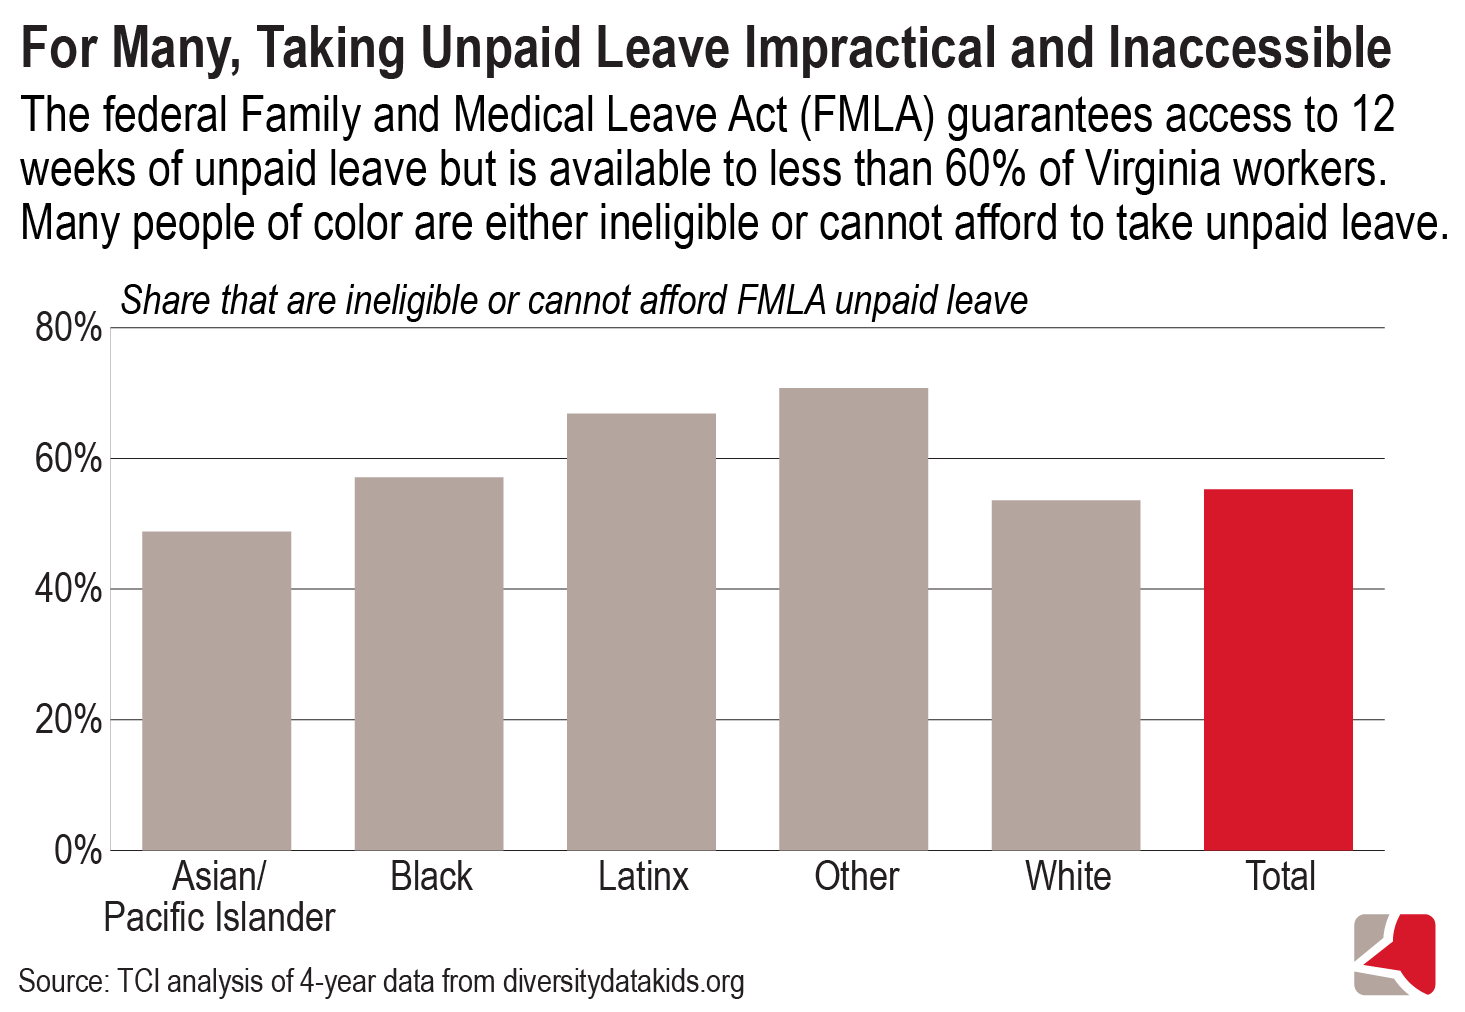 Bar graph showing the share of people that are ineligible or cannot afford FMLA unpaid leave by race, based on TCI analysis of 4-year data from diversitydatakids.org